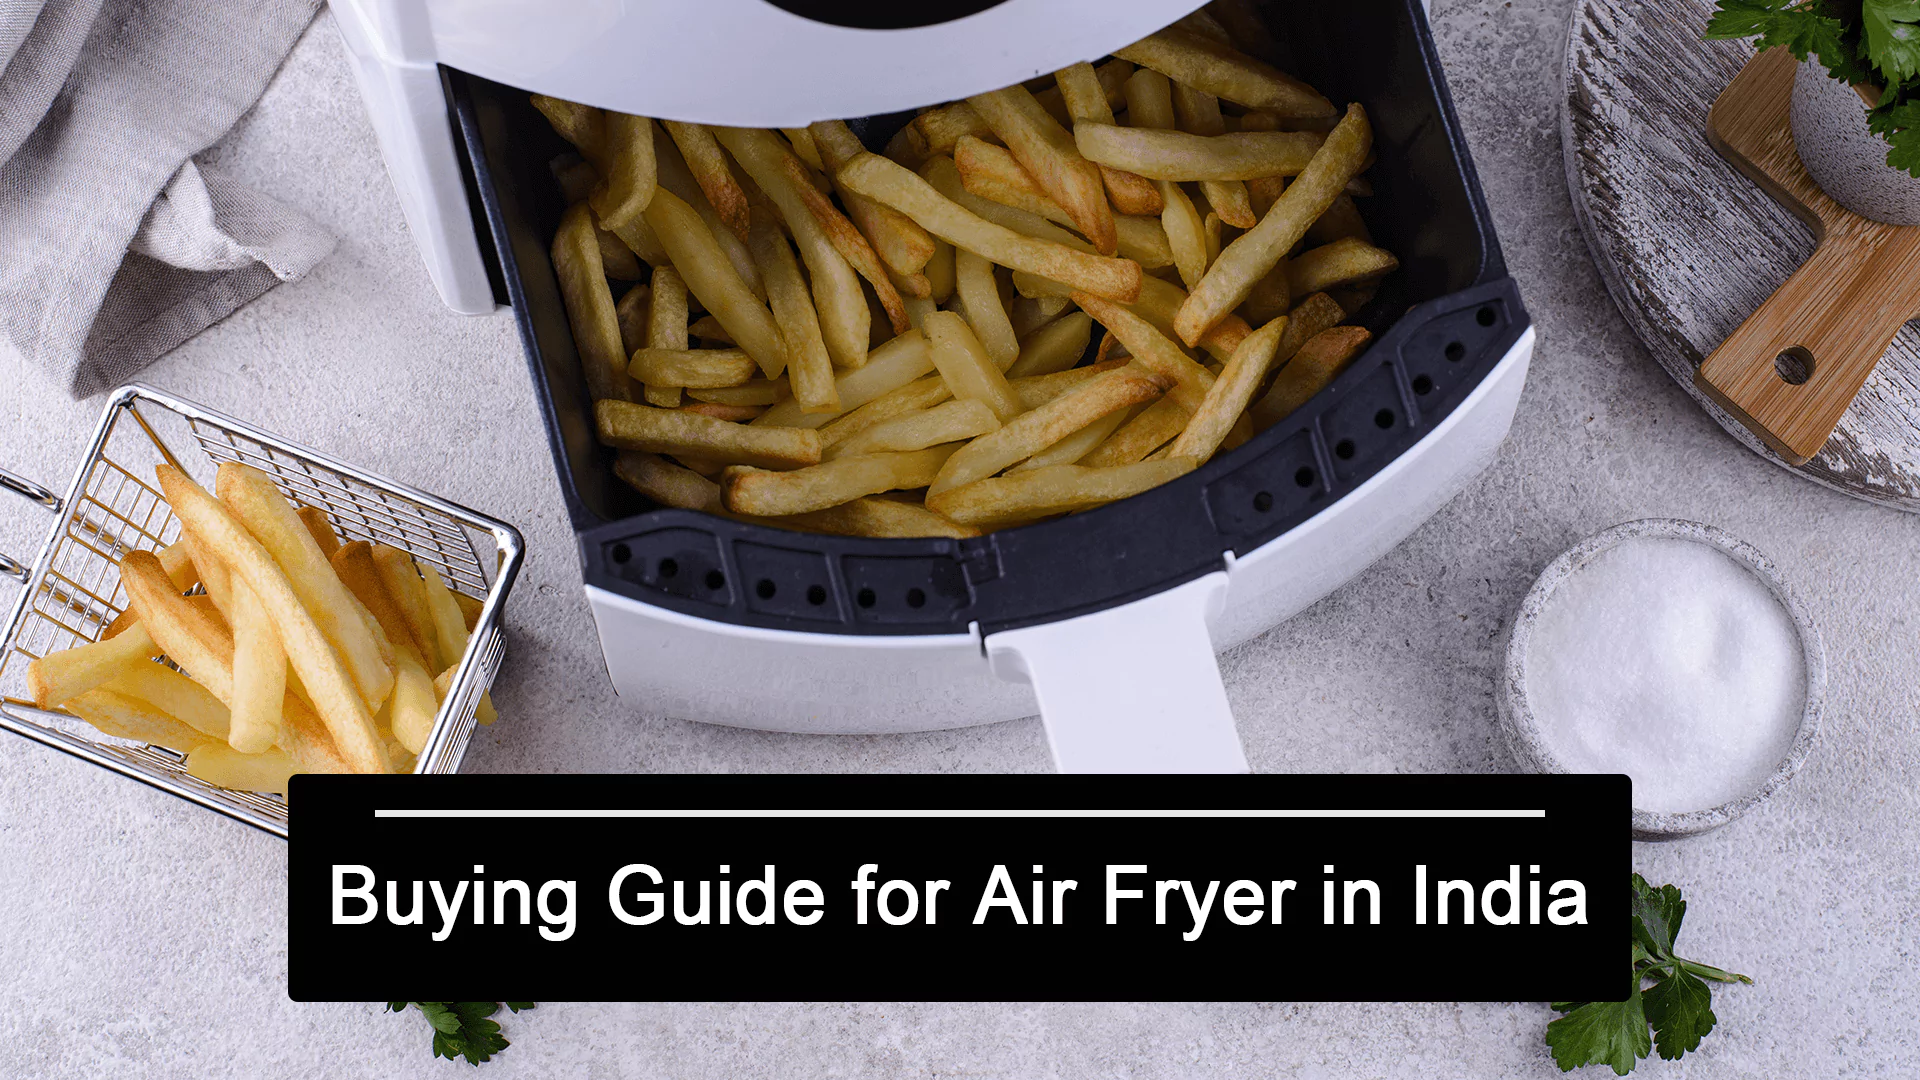 Buying Guide for Air Fryer in India